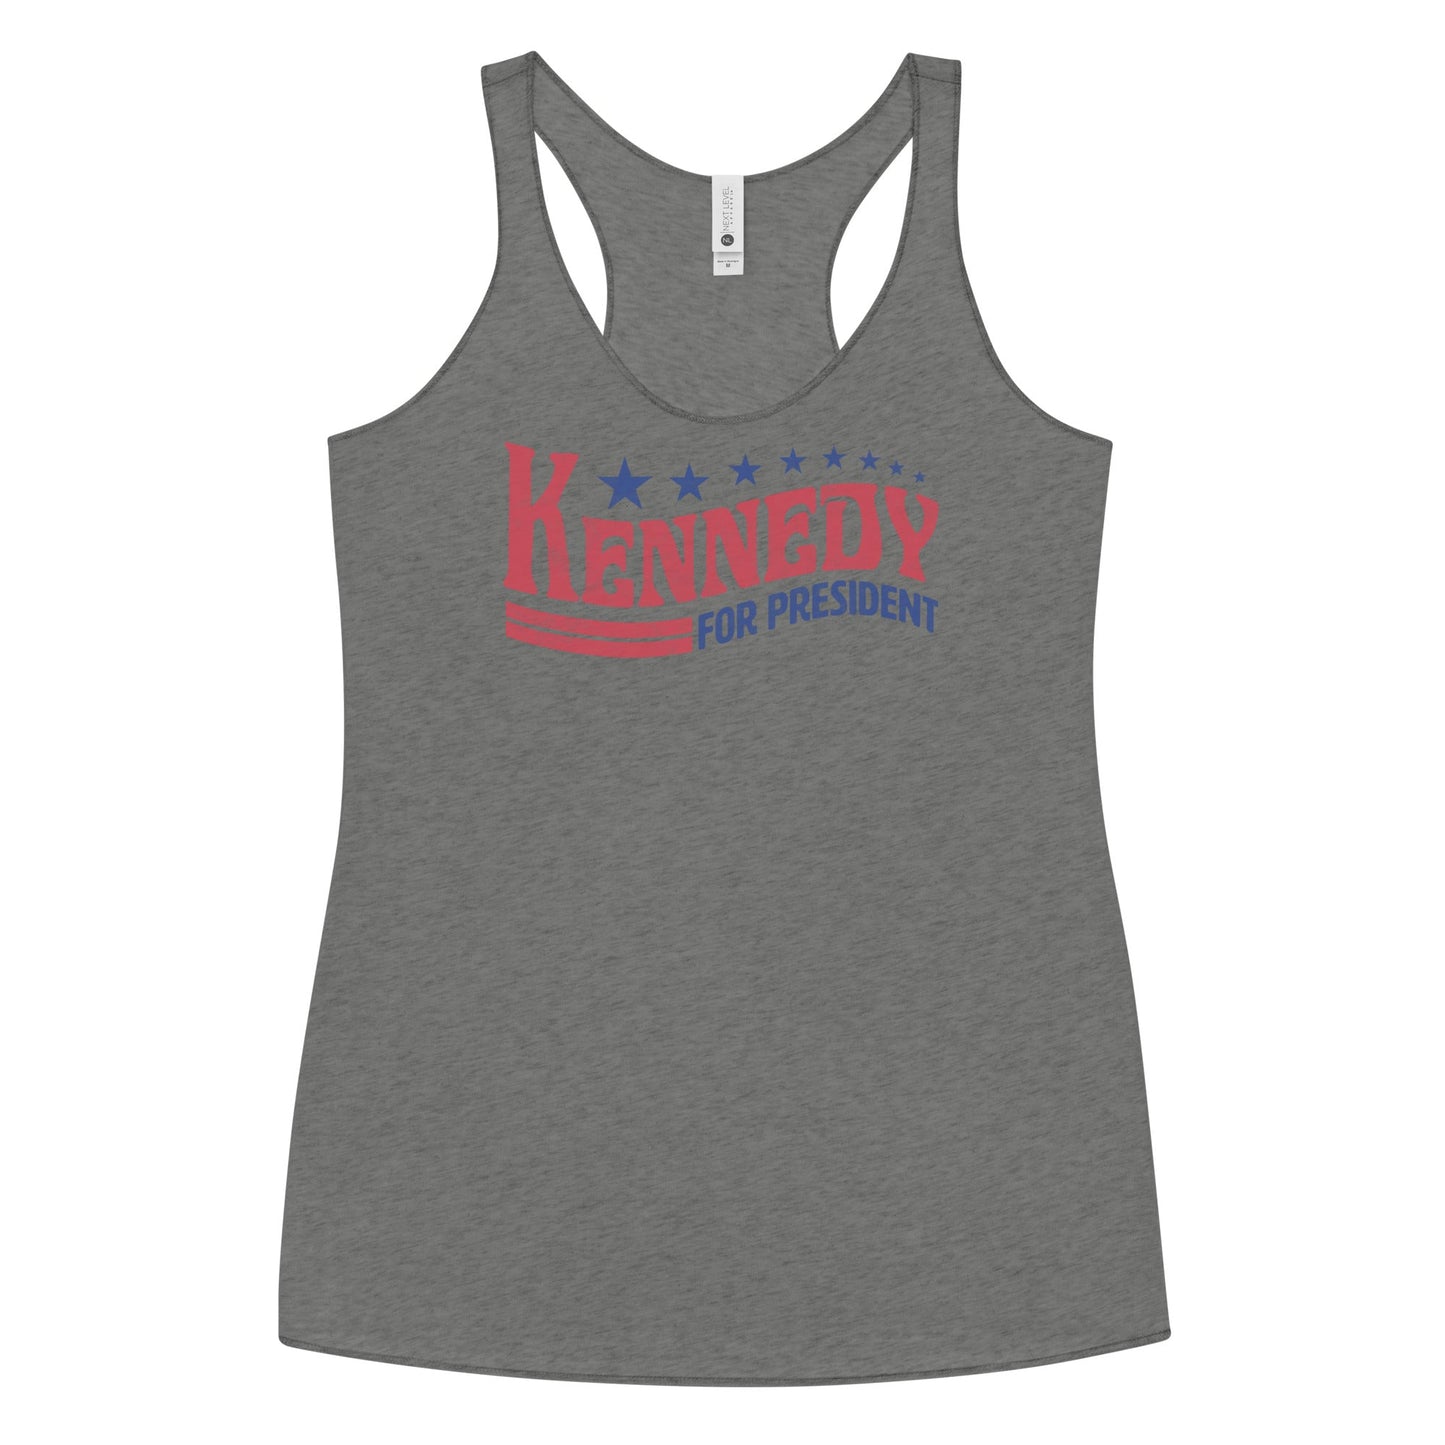 Kennedy for President Vintage Women's Racerback Tank - TEAM KENNEDY. All rights reserved